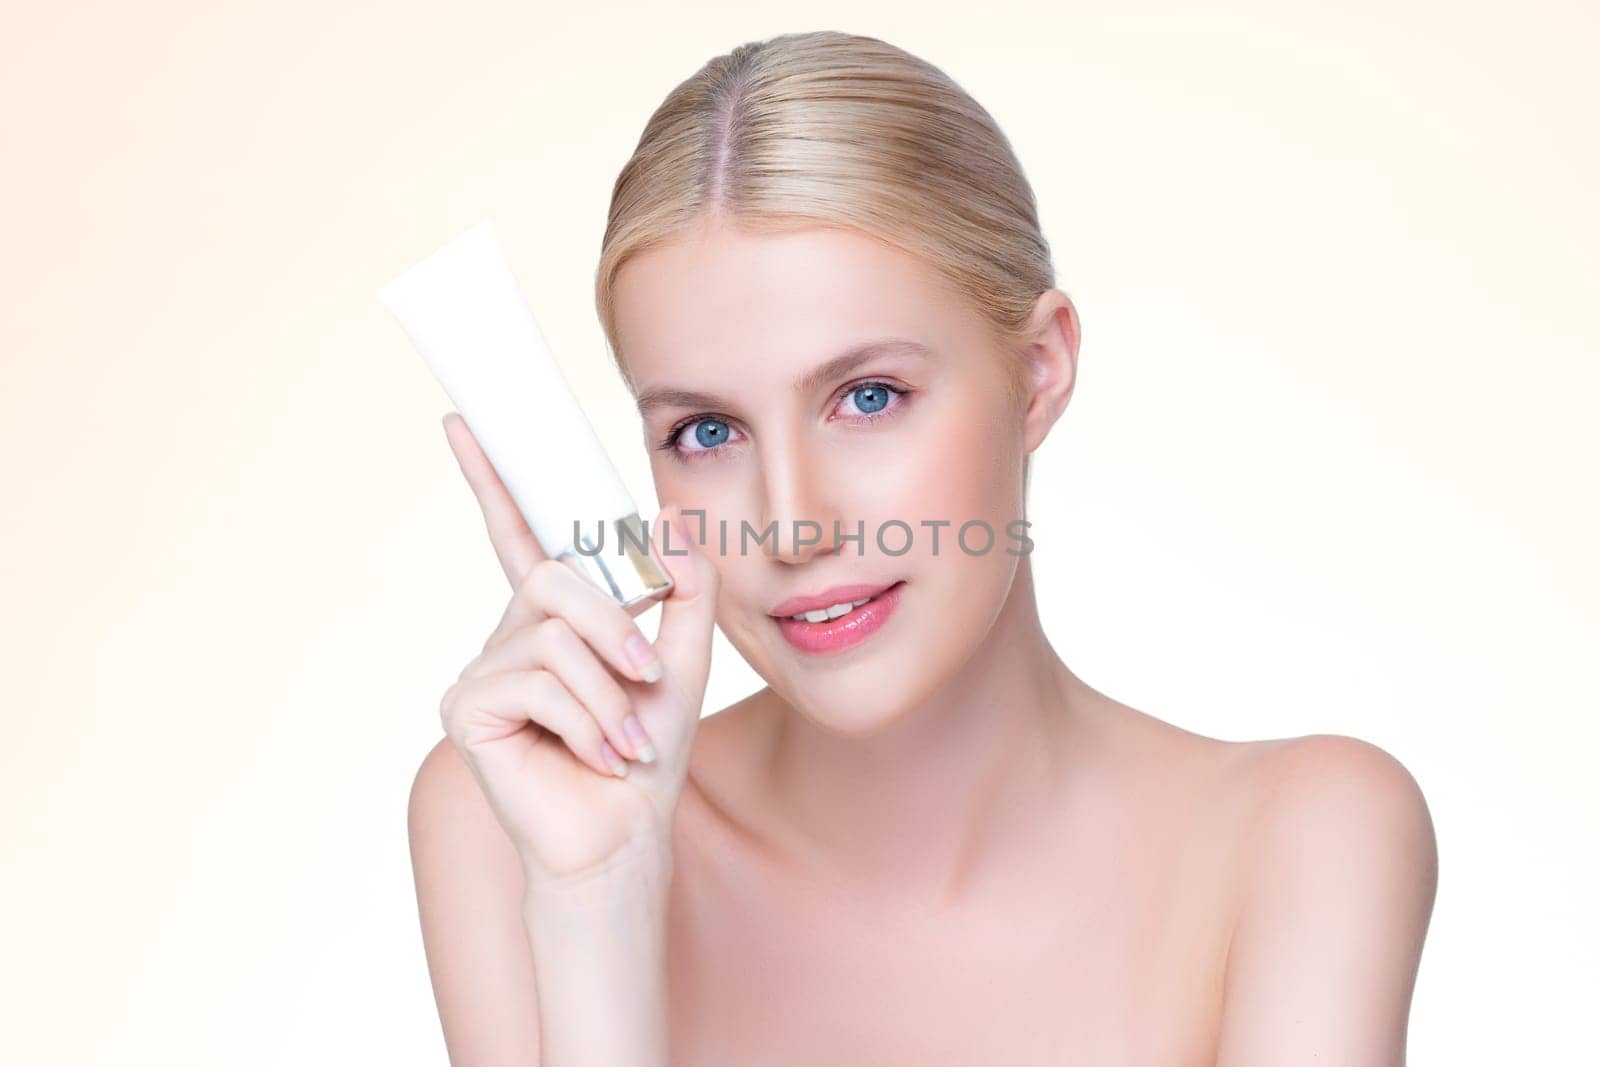 Personable beautiful perfect natural skin woman hold mockup tube moisturizer cream for skincare treatment product advertisement in isolated background with expressive facial and gesture expression.